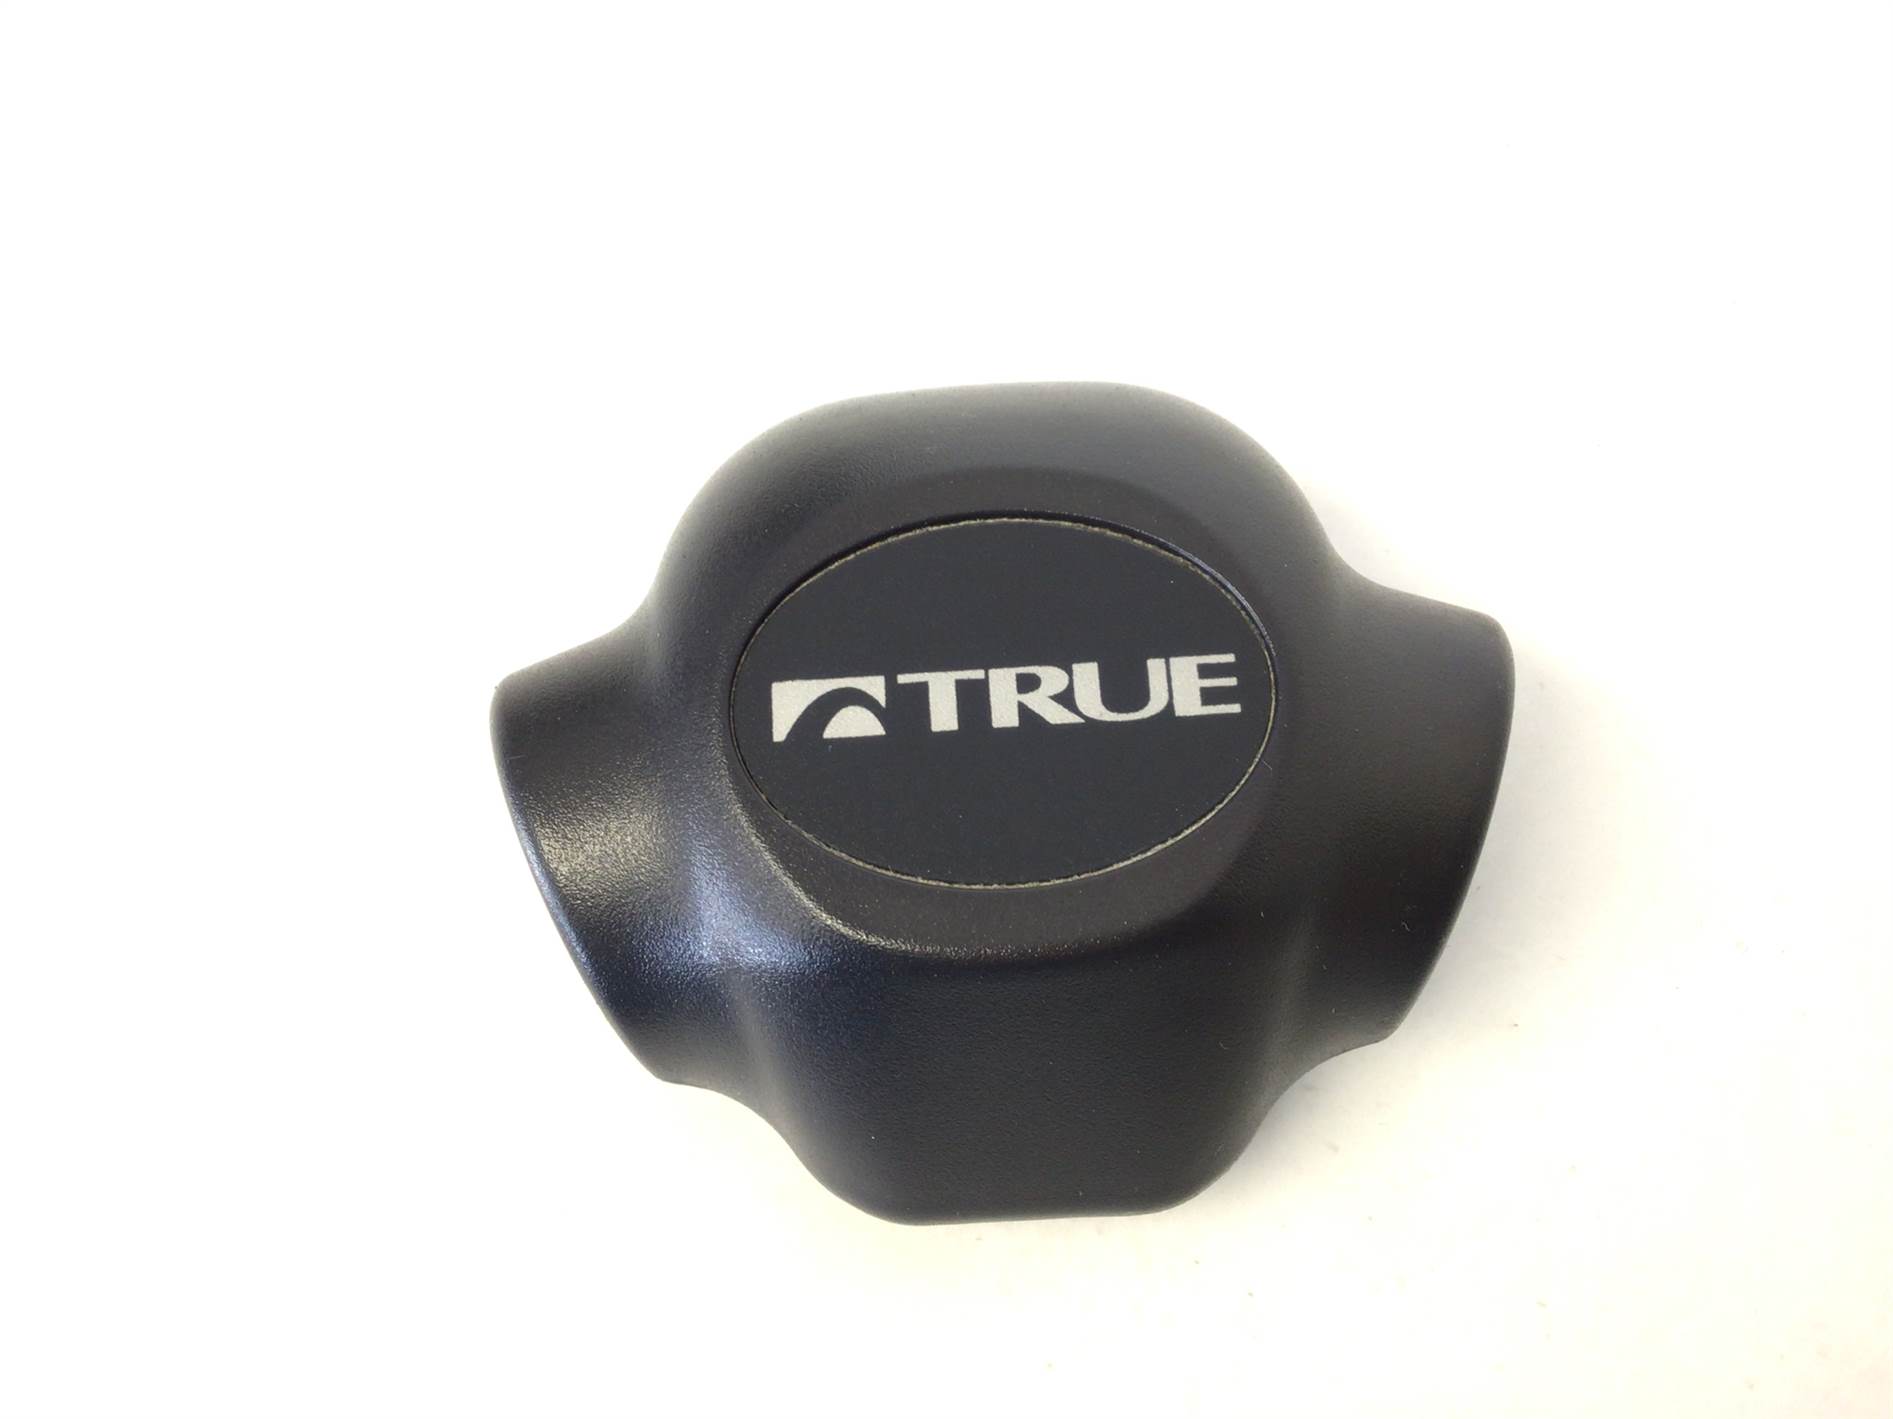 Center handlebar With True Decal (Used)